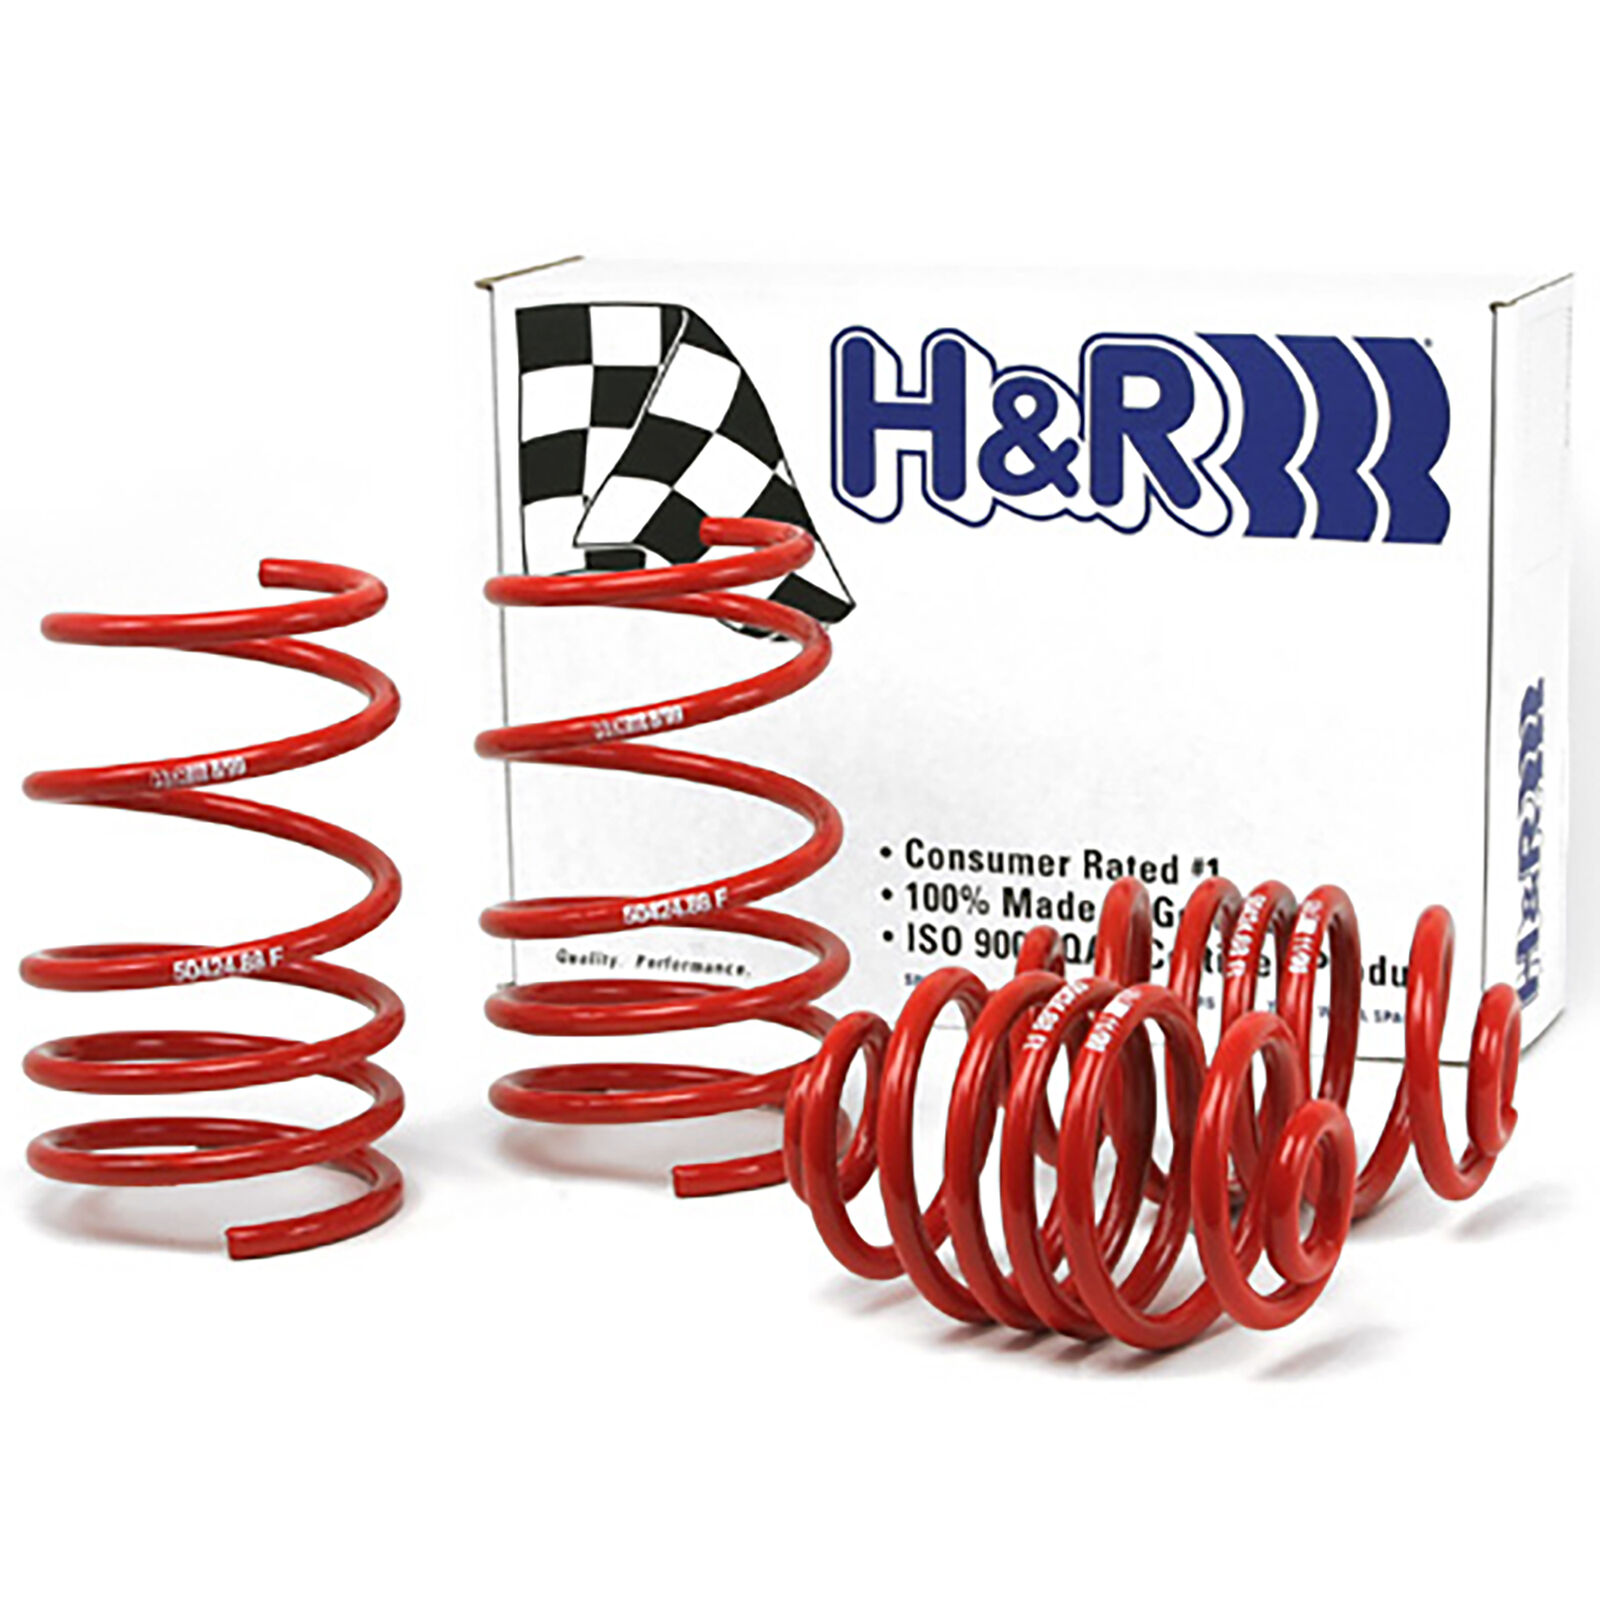 H&R 50424-88 Lowering Race Springs Kit for 1992-98 BMW 325i 325is 328i 328is E36